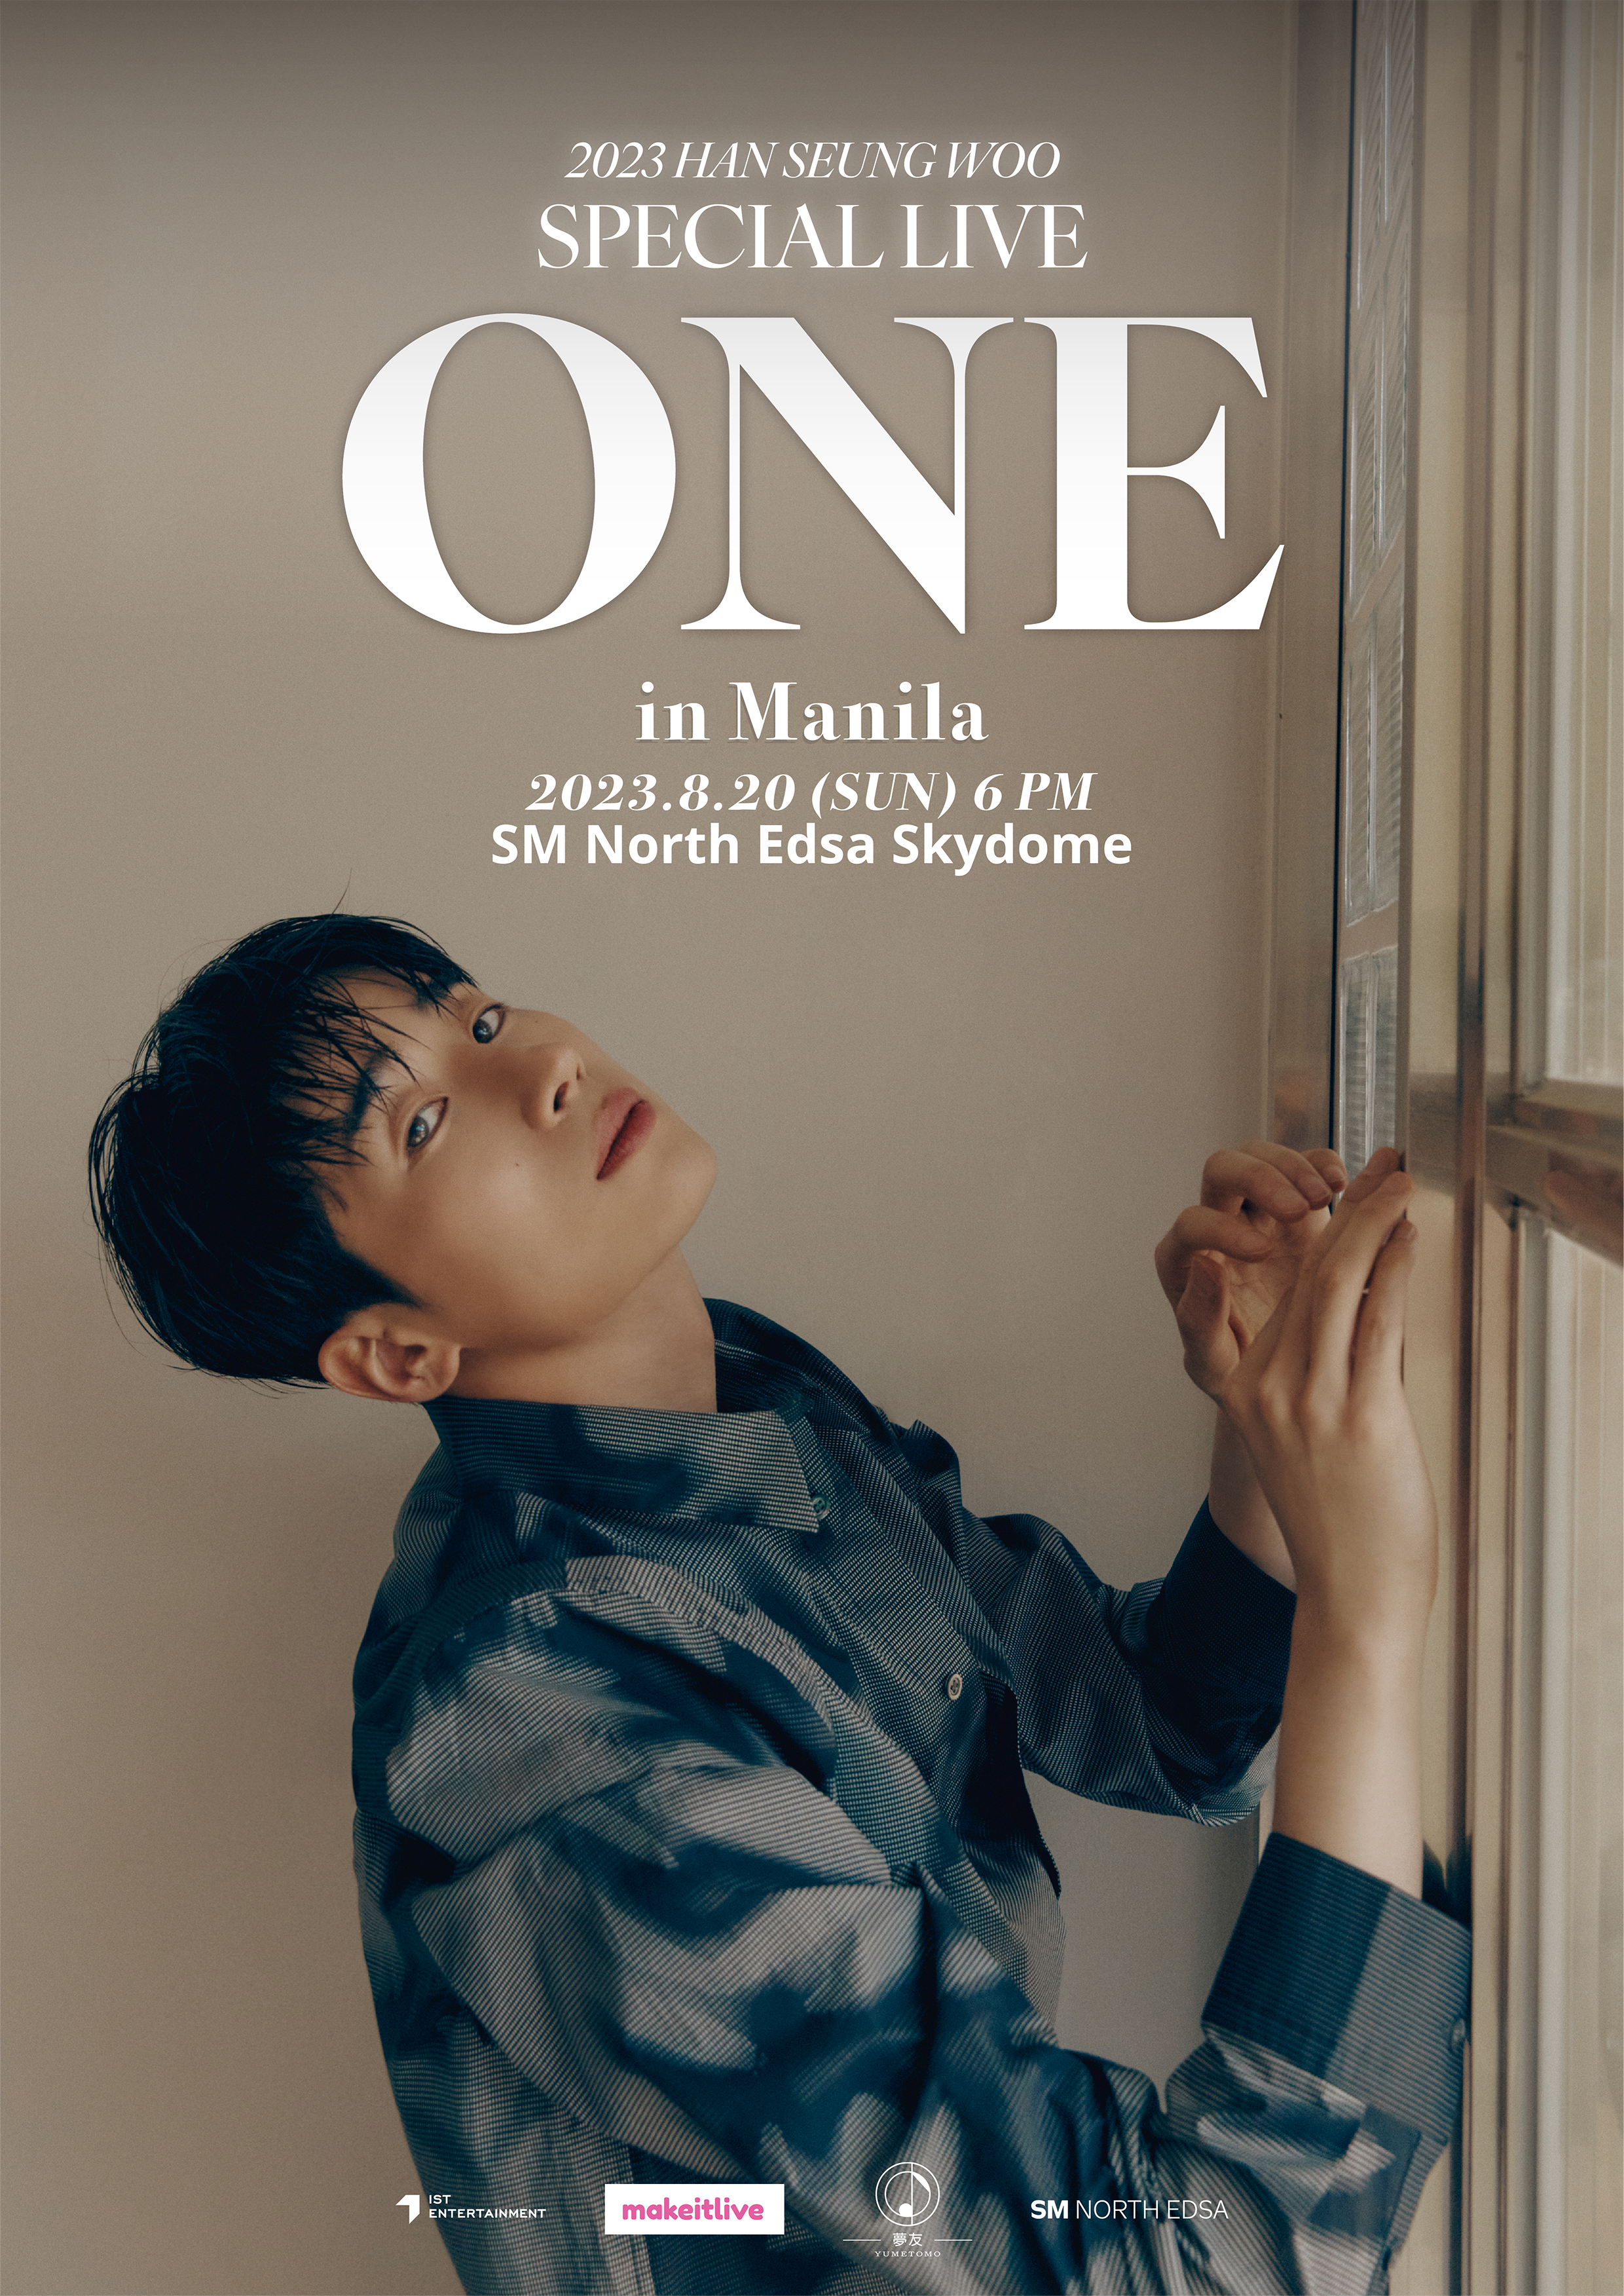 [UPCOMING EVENT] 2023 Han Seung Woo Special Live ‘ONE’ in Manila